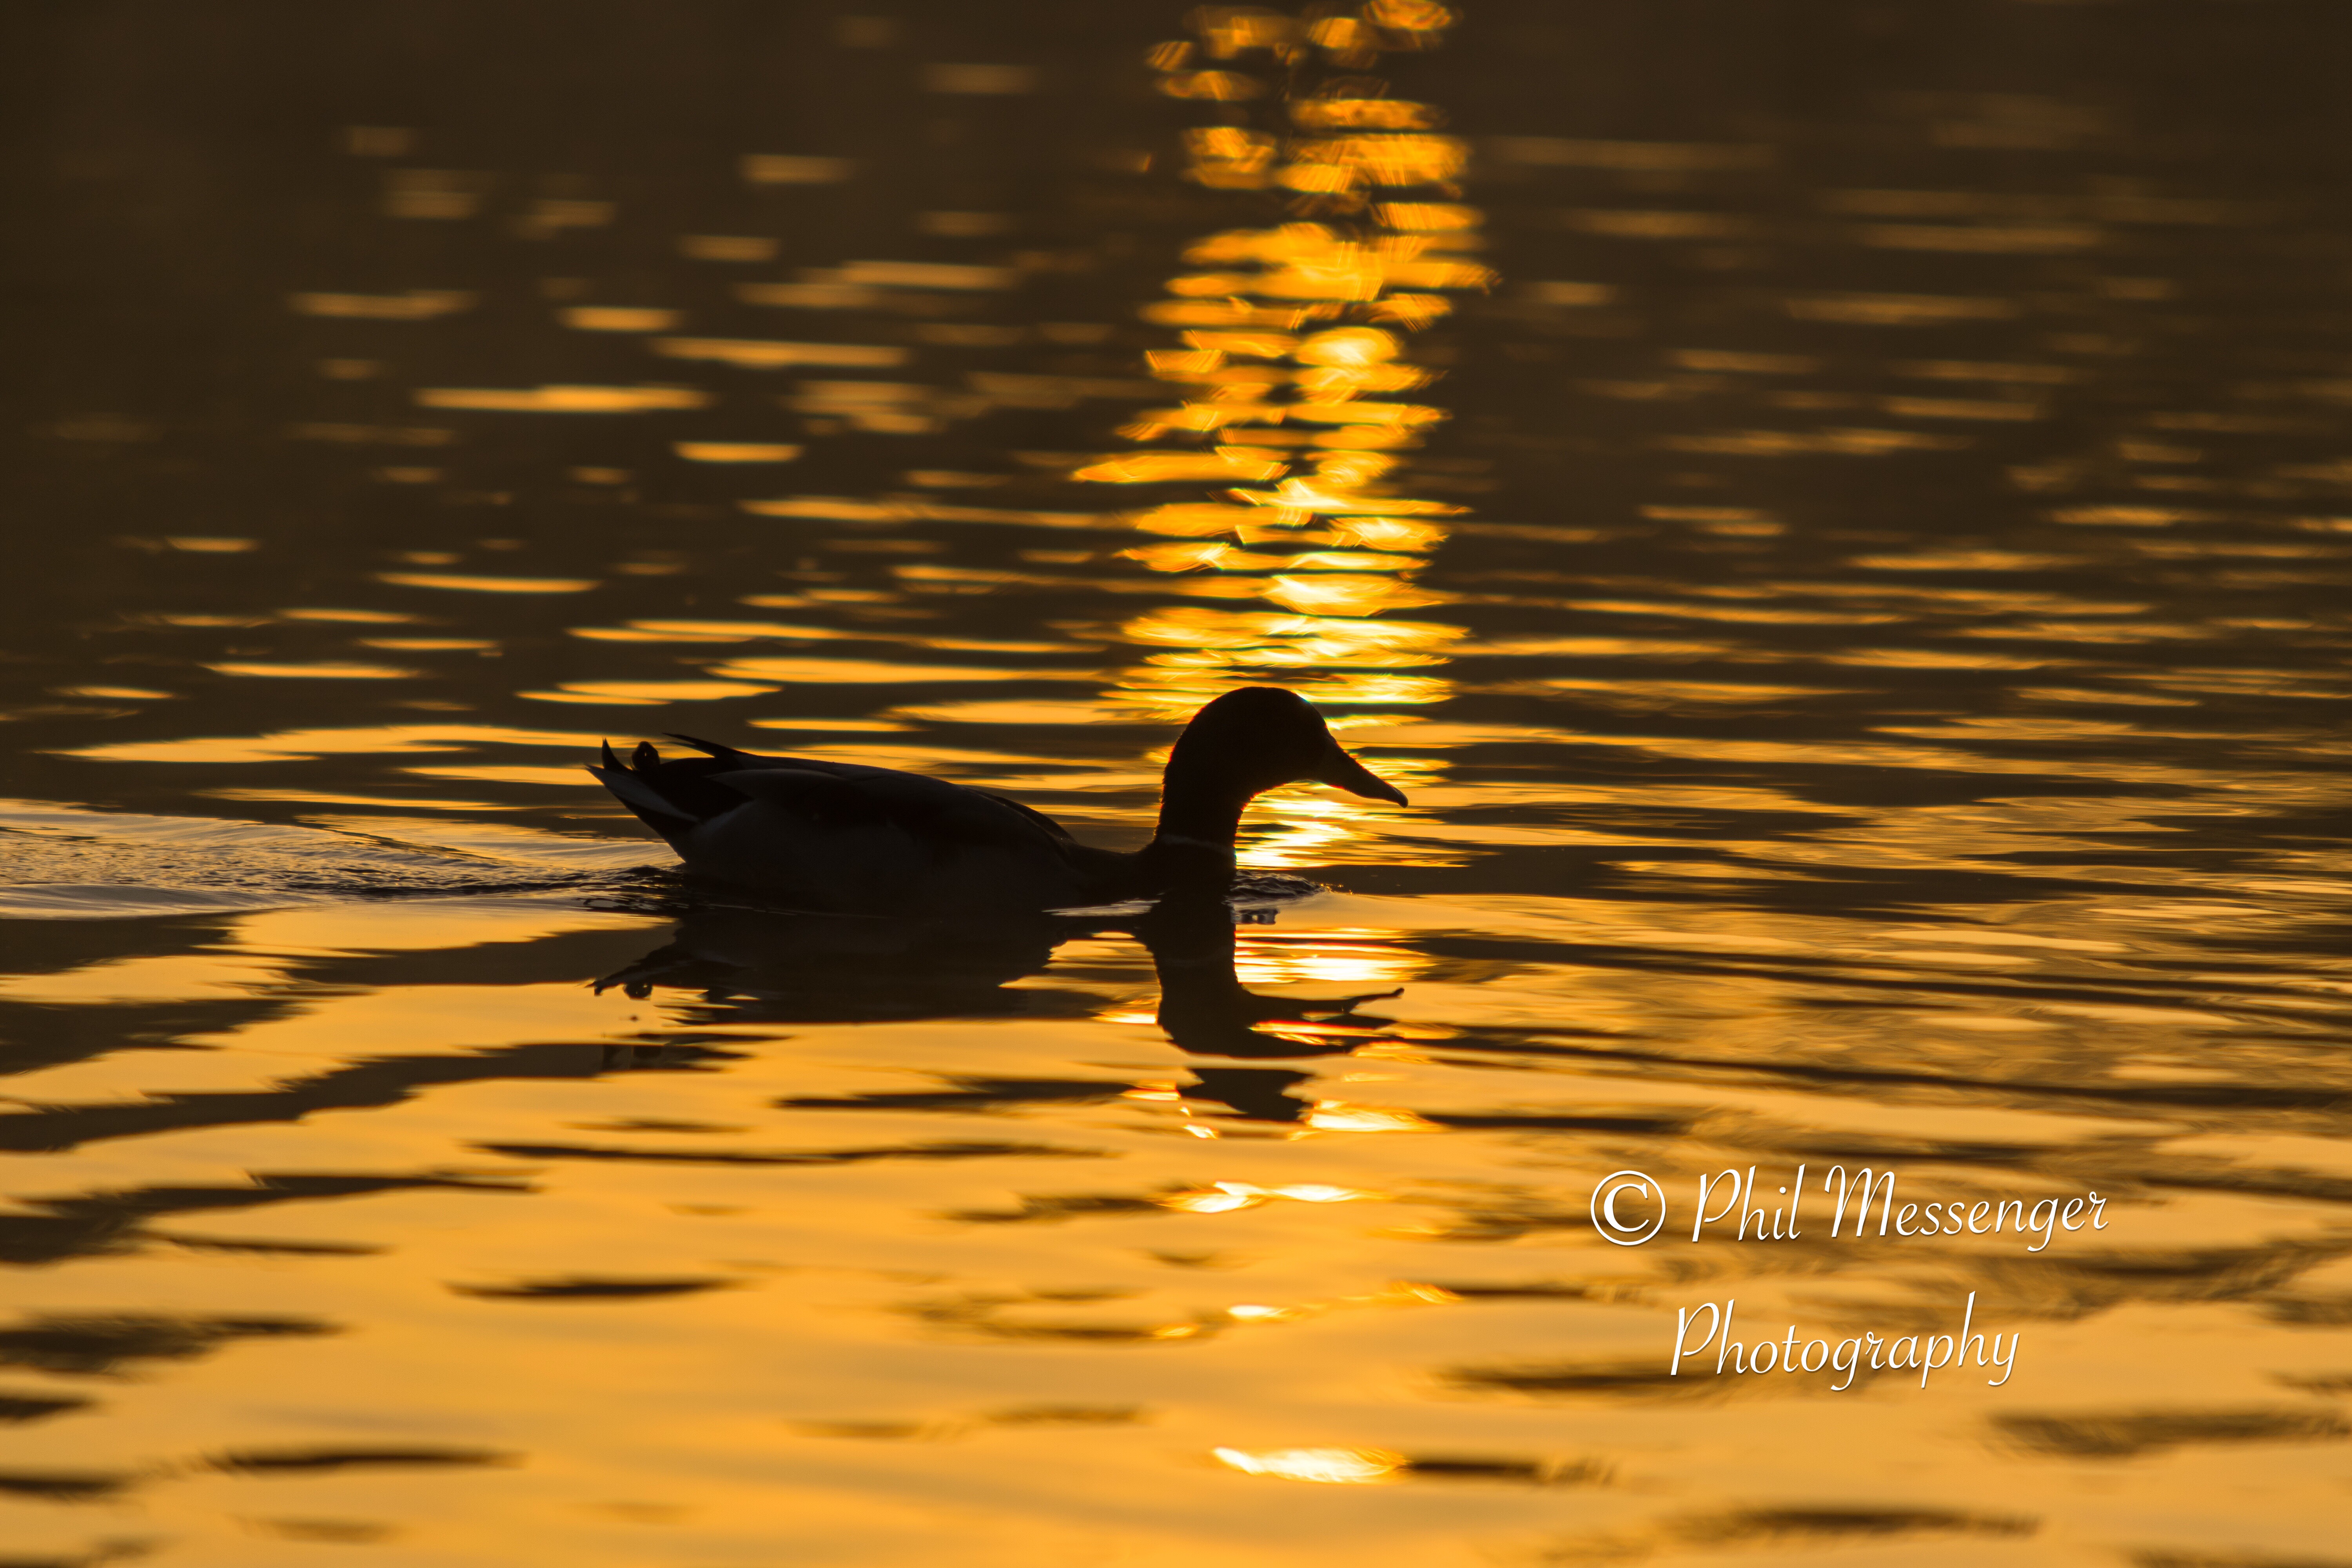 A duck silhouette taken against the early morning sunrise on Saturday.